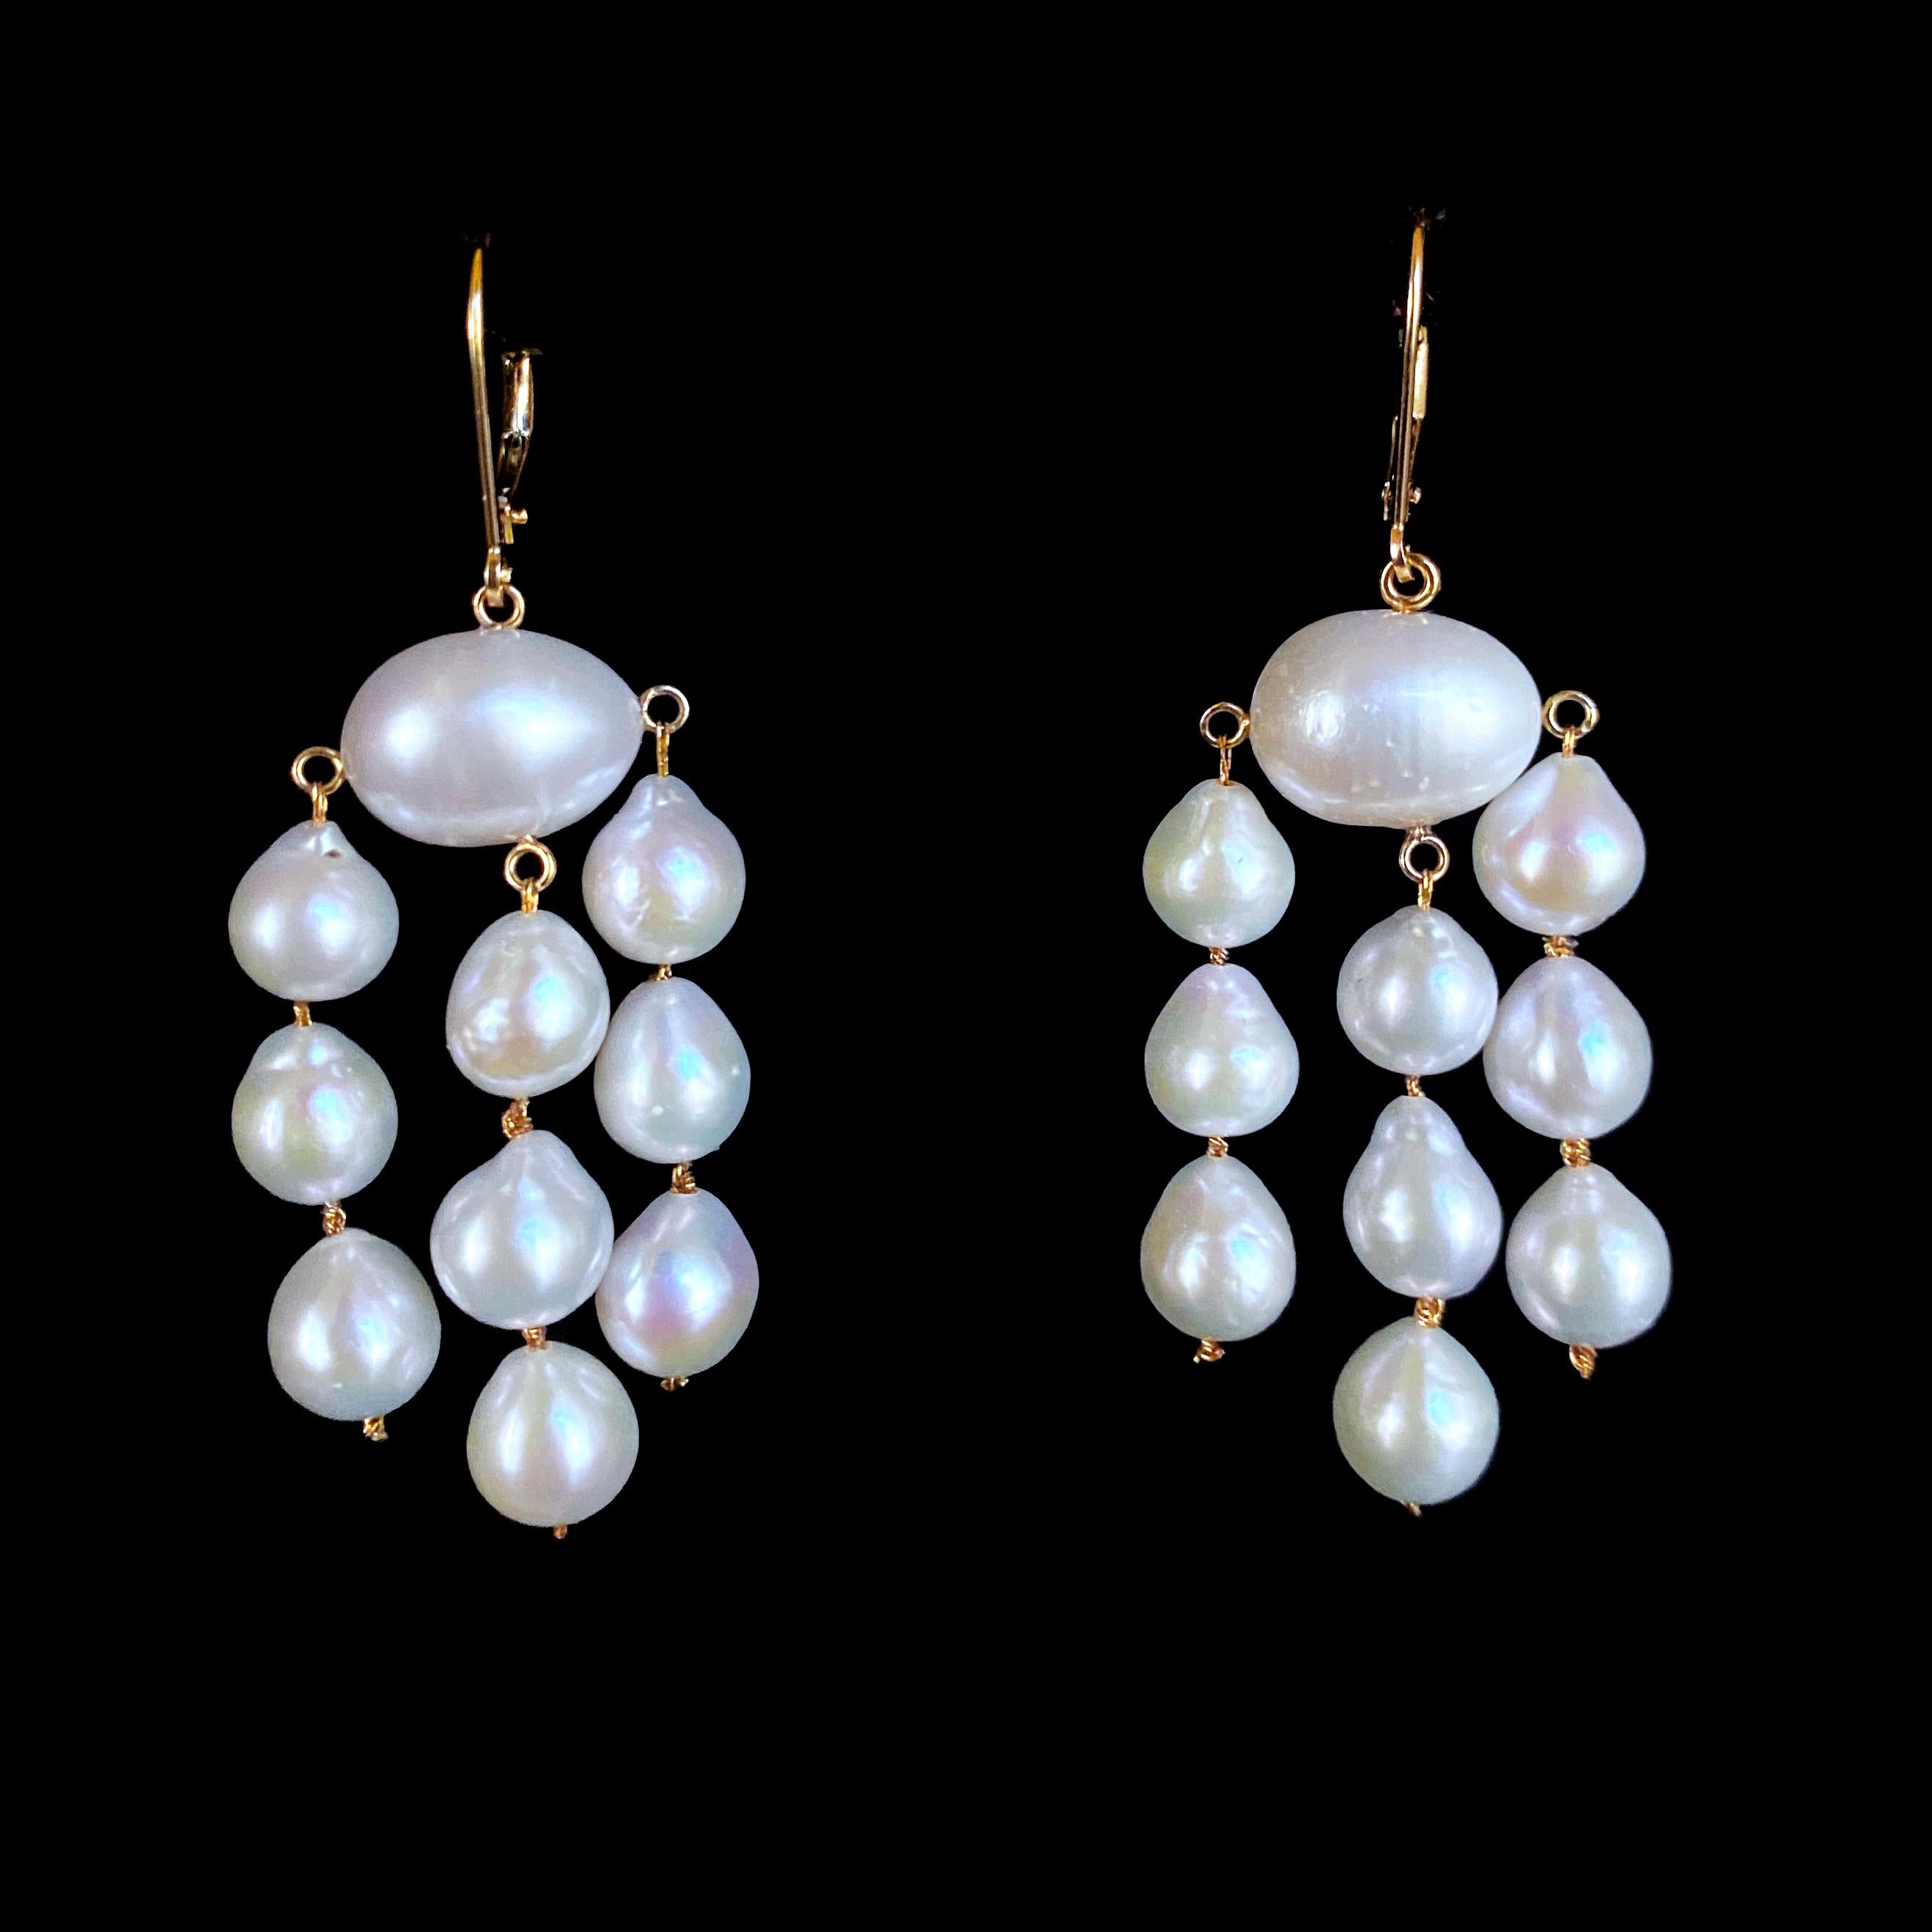 Simple and stunning pair of Earrings by Marina J. This pair is made of all solid 14k Yellow Gold wiring and hooks. A oval Baroque white Pearl sits in the middle, from which three strands of 3 Teardrop shaped Baroque Pearls hang. The Pearls in this